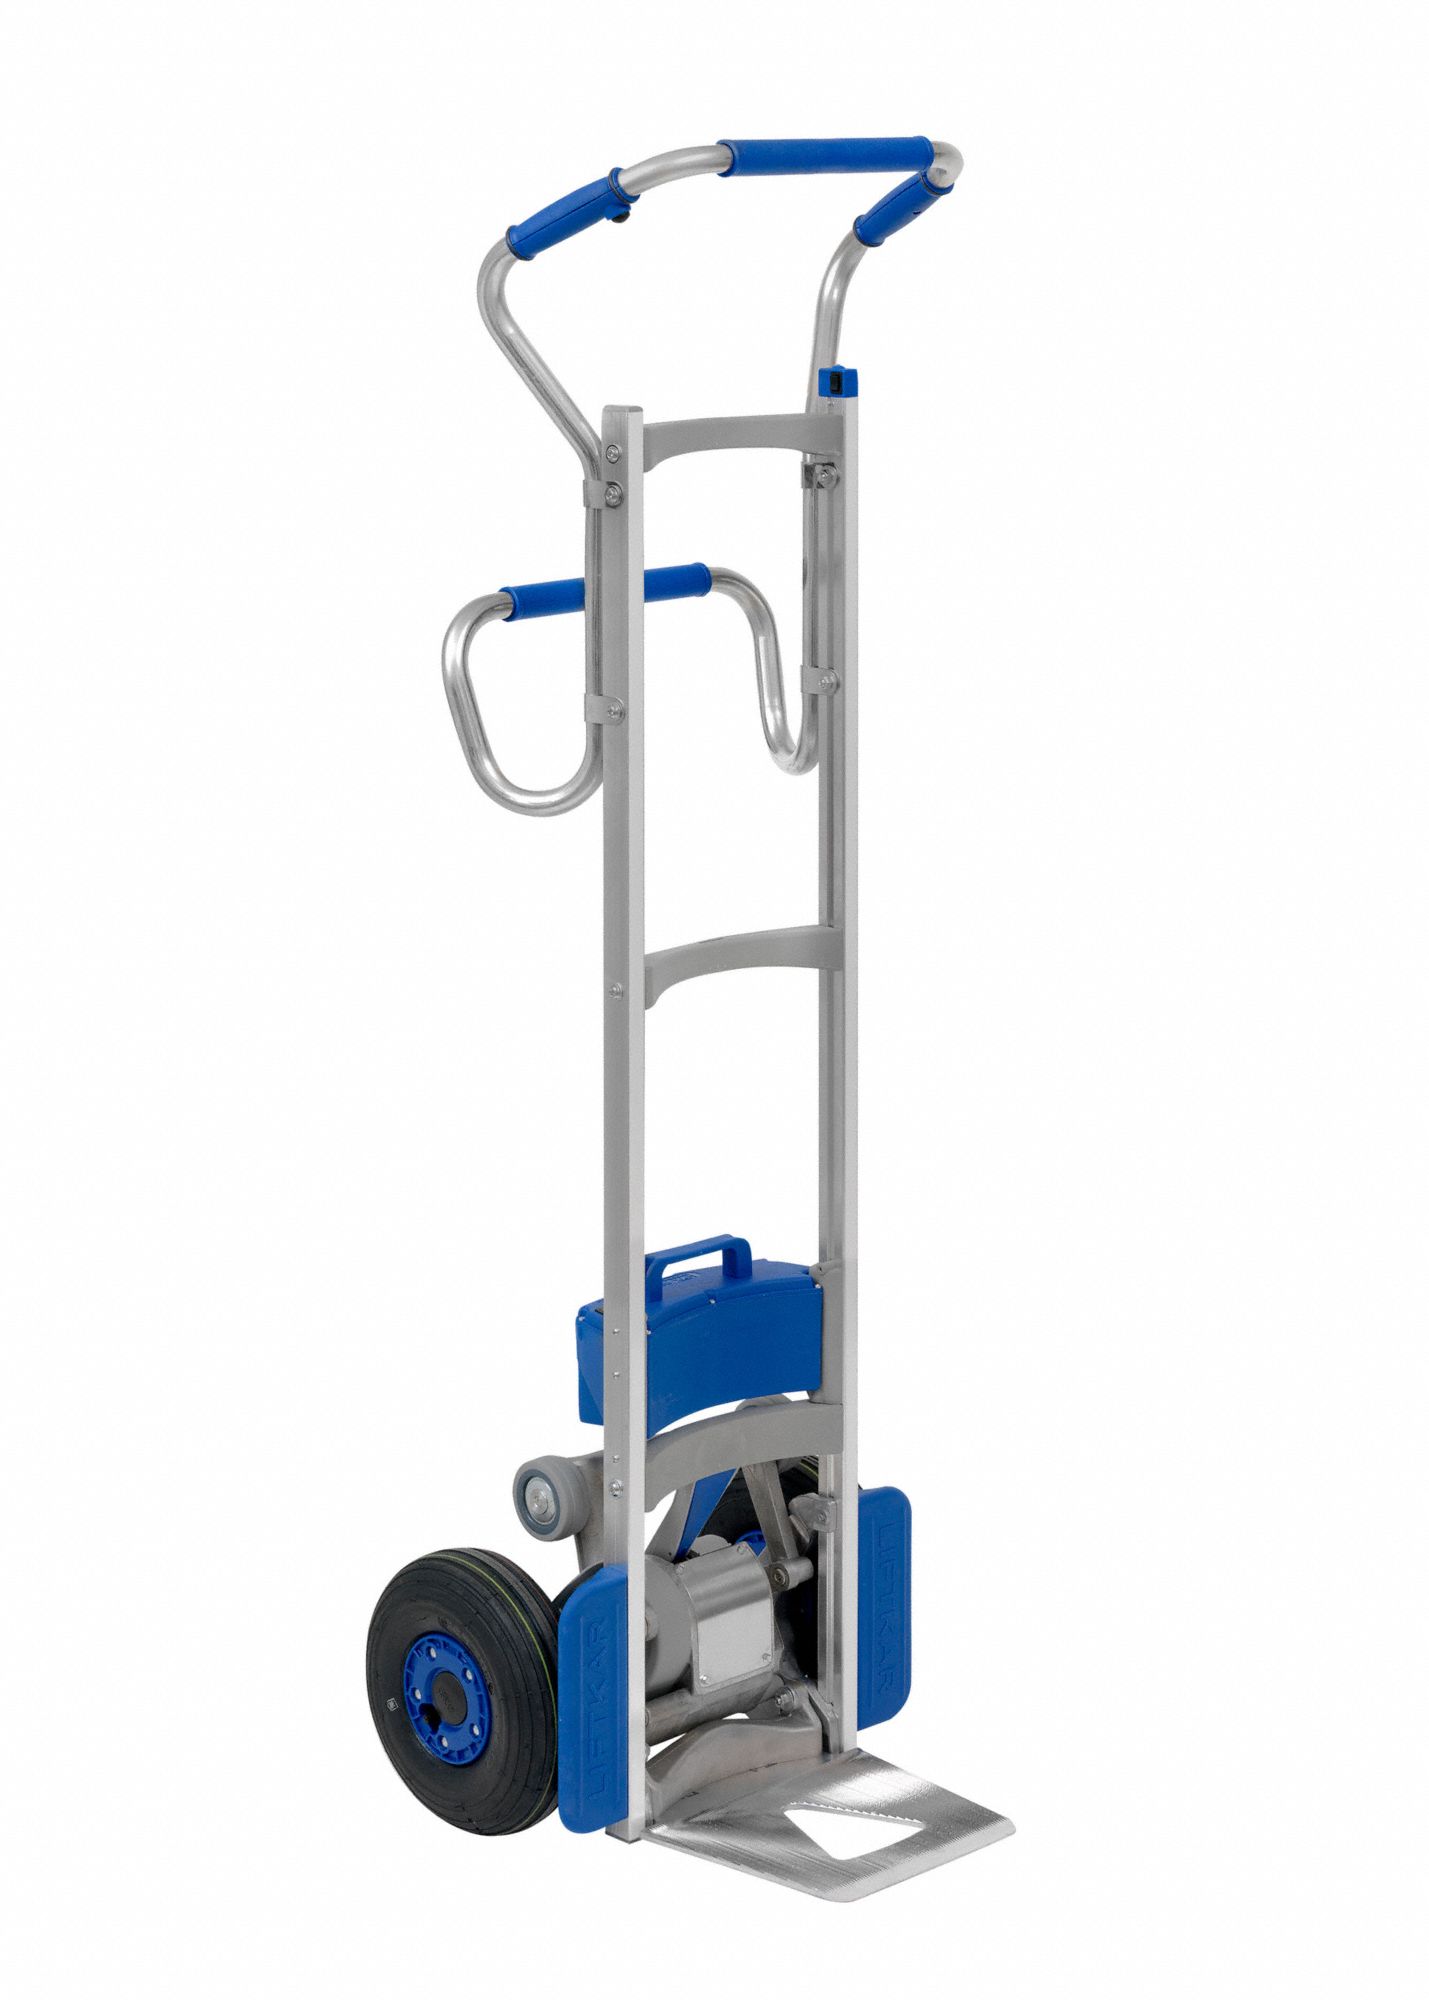 Stair Climbing Hand Truck: 240 lb Load Capacity, 16.5 in x 13.4 in, Pneumatic